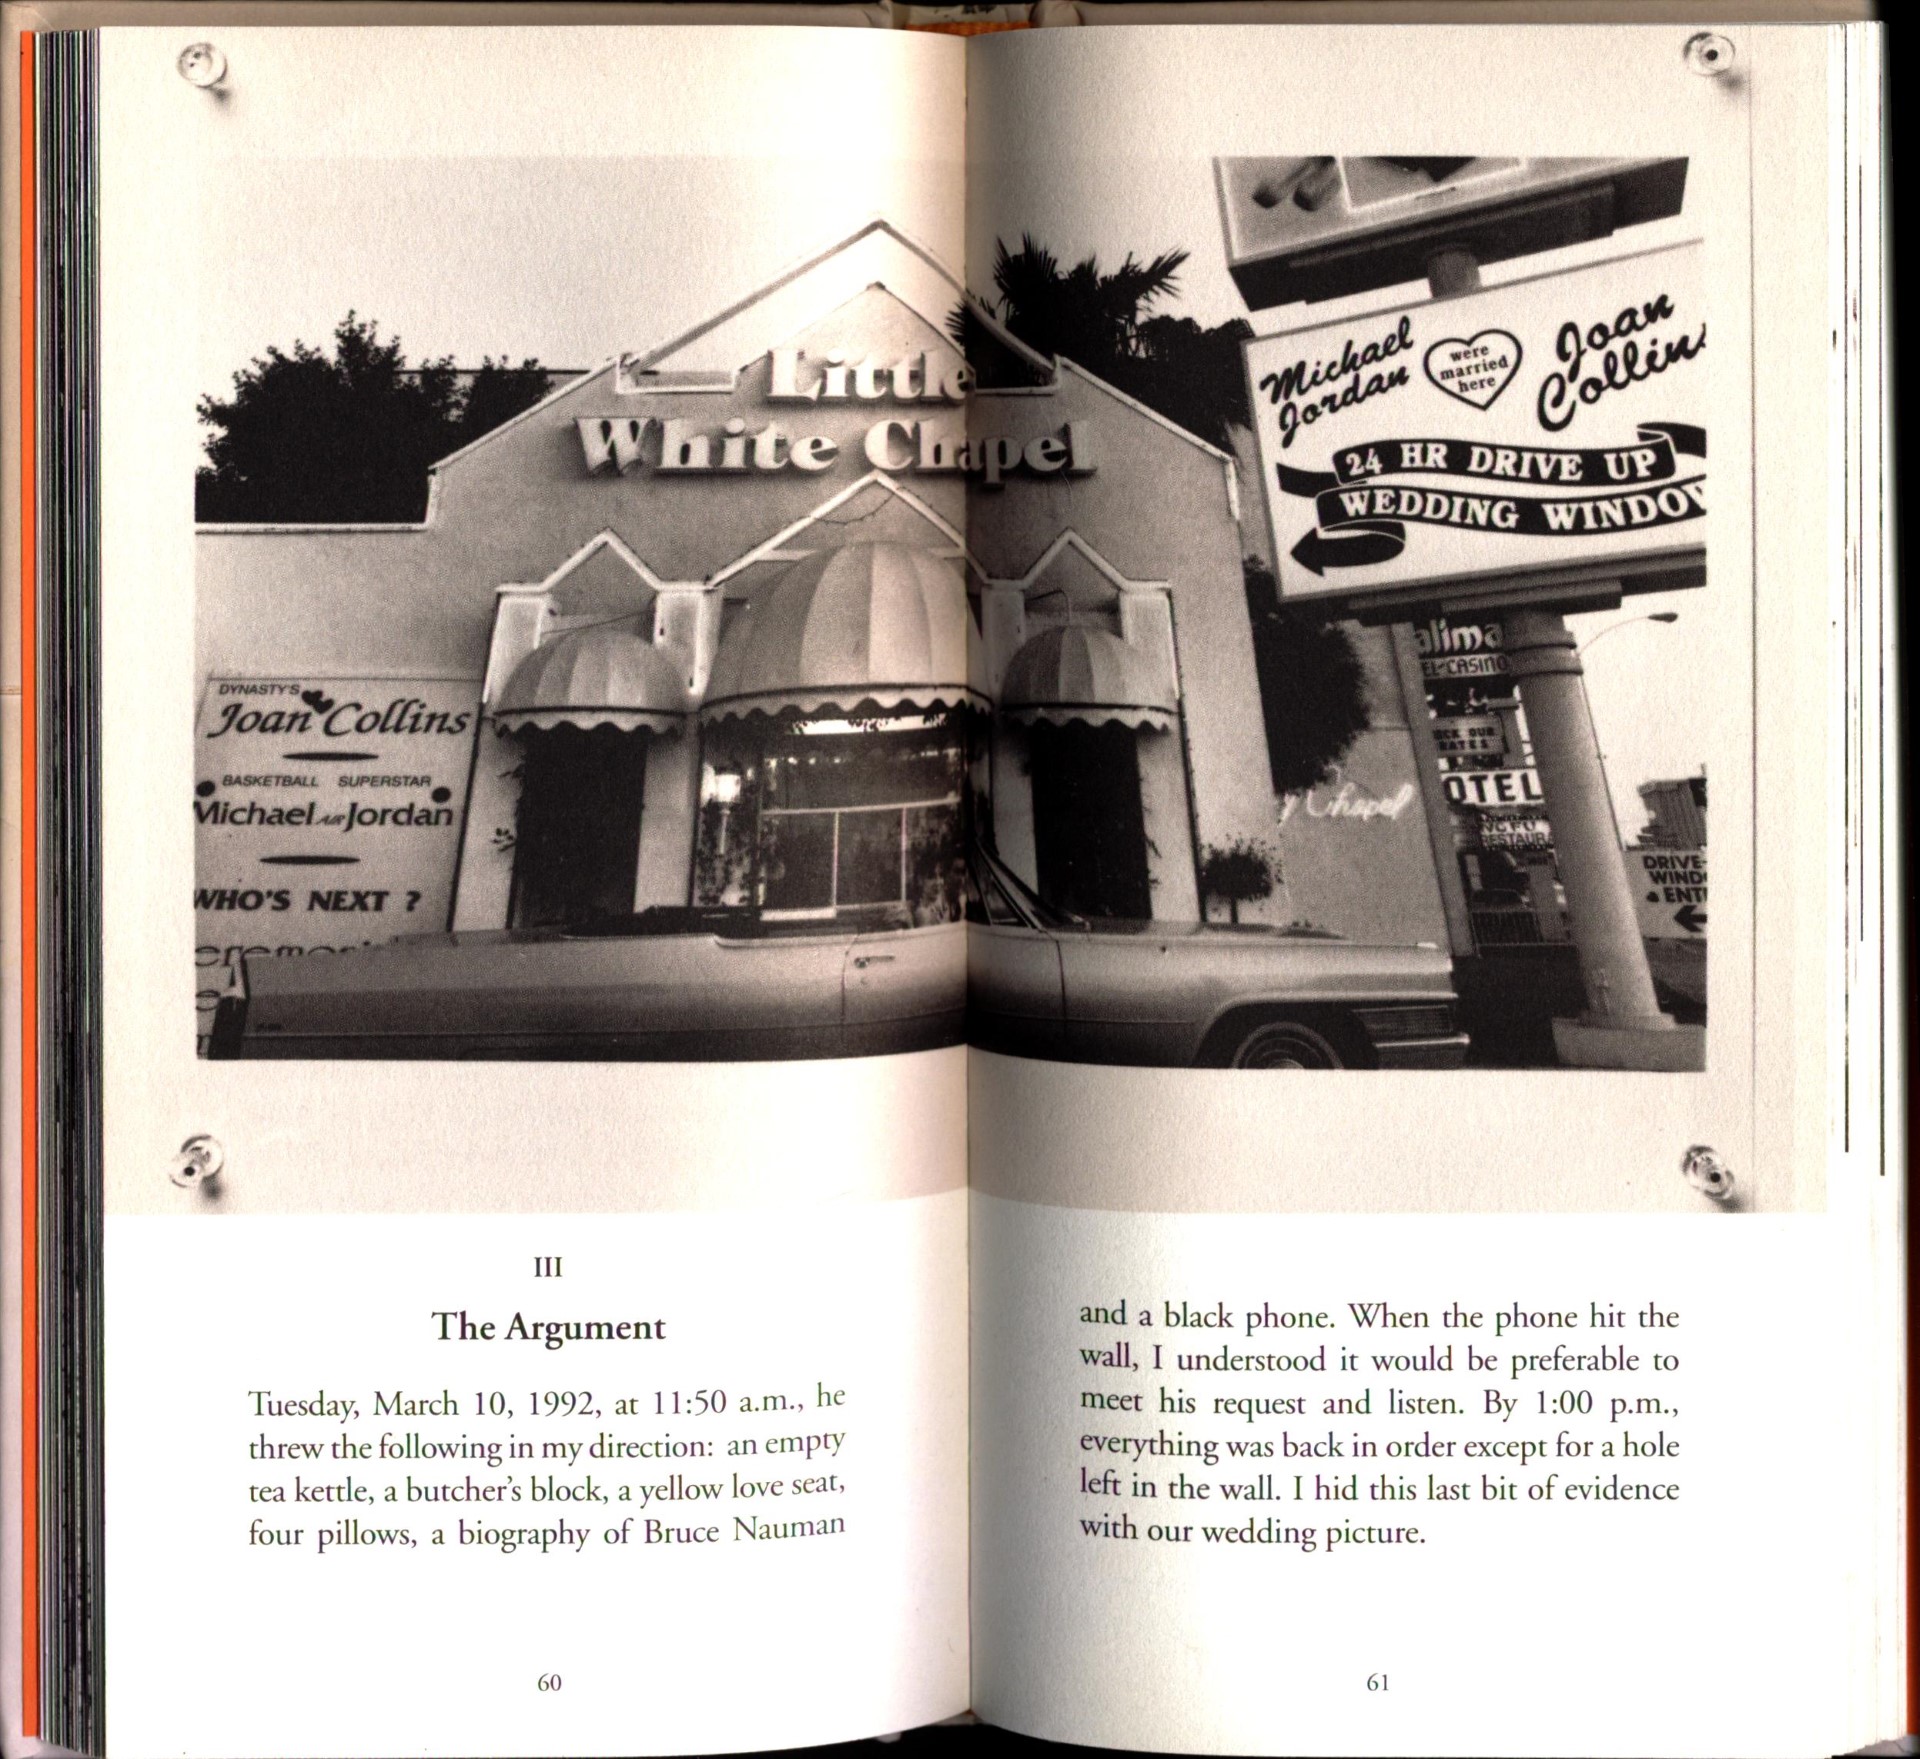 Open book with a black-and-white photograph spread across both pages, showing a gabled building with rounded awnings with a sign above that reads "Little White Chapel." Nearby signs indicate that Joan Collins and Michael Jordan were both married there. Text below the image has the header "III / The Argument."